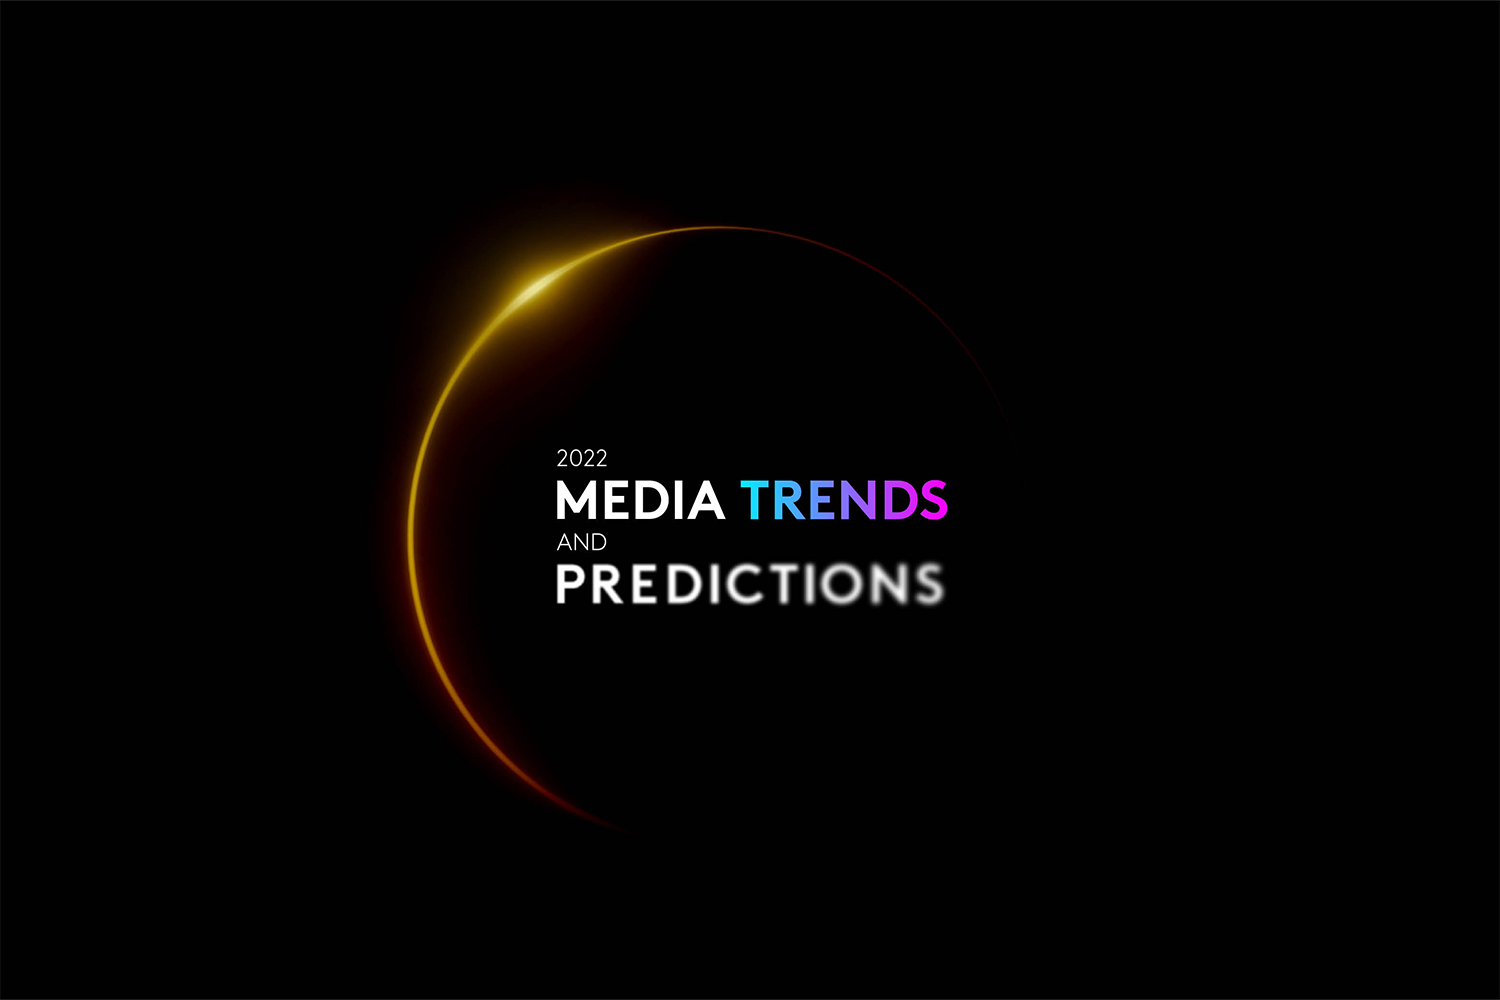 Media Trends and Predictions 2022